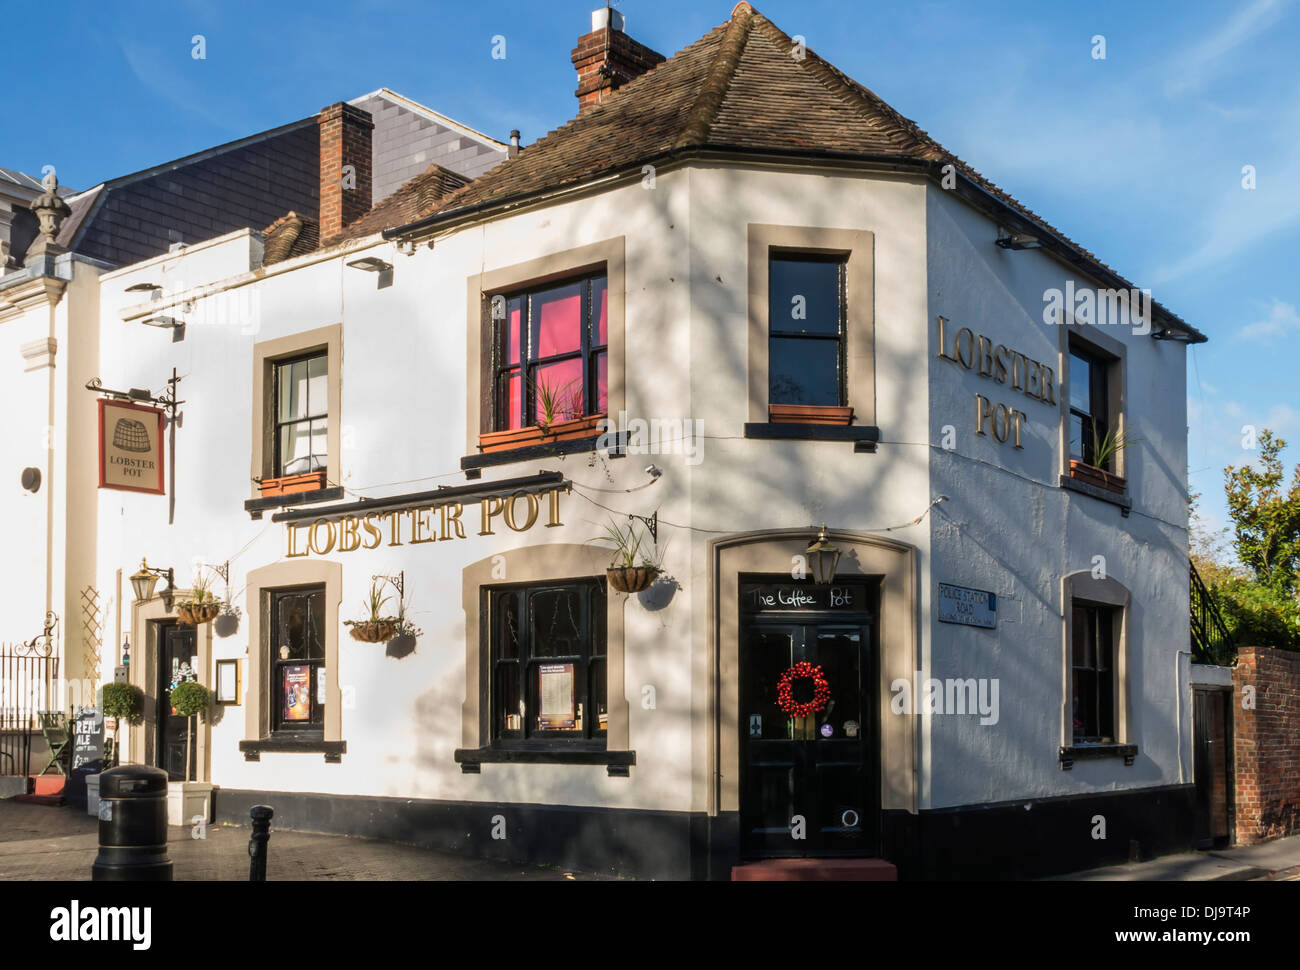 The Lobster Pub West Malling Kent Stock Photo